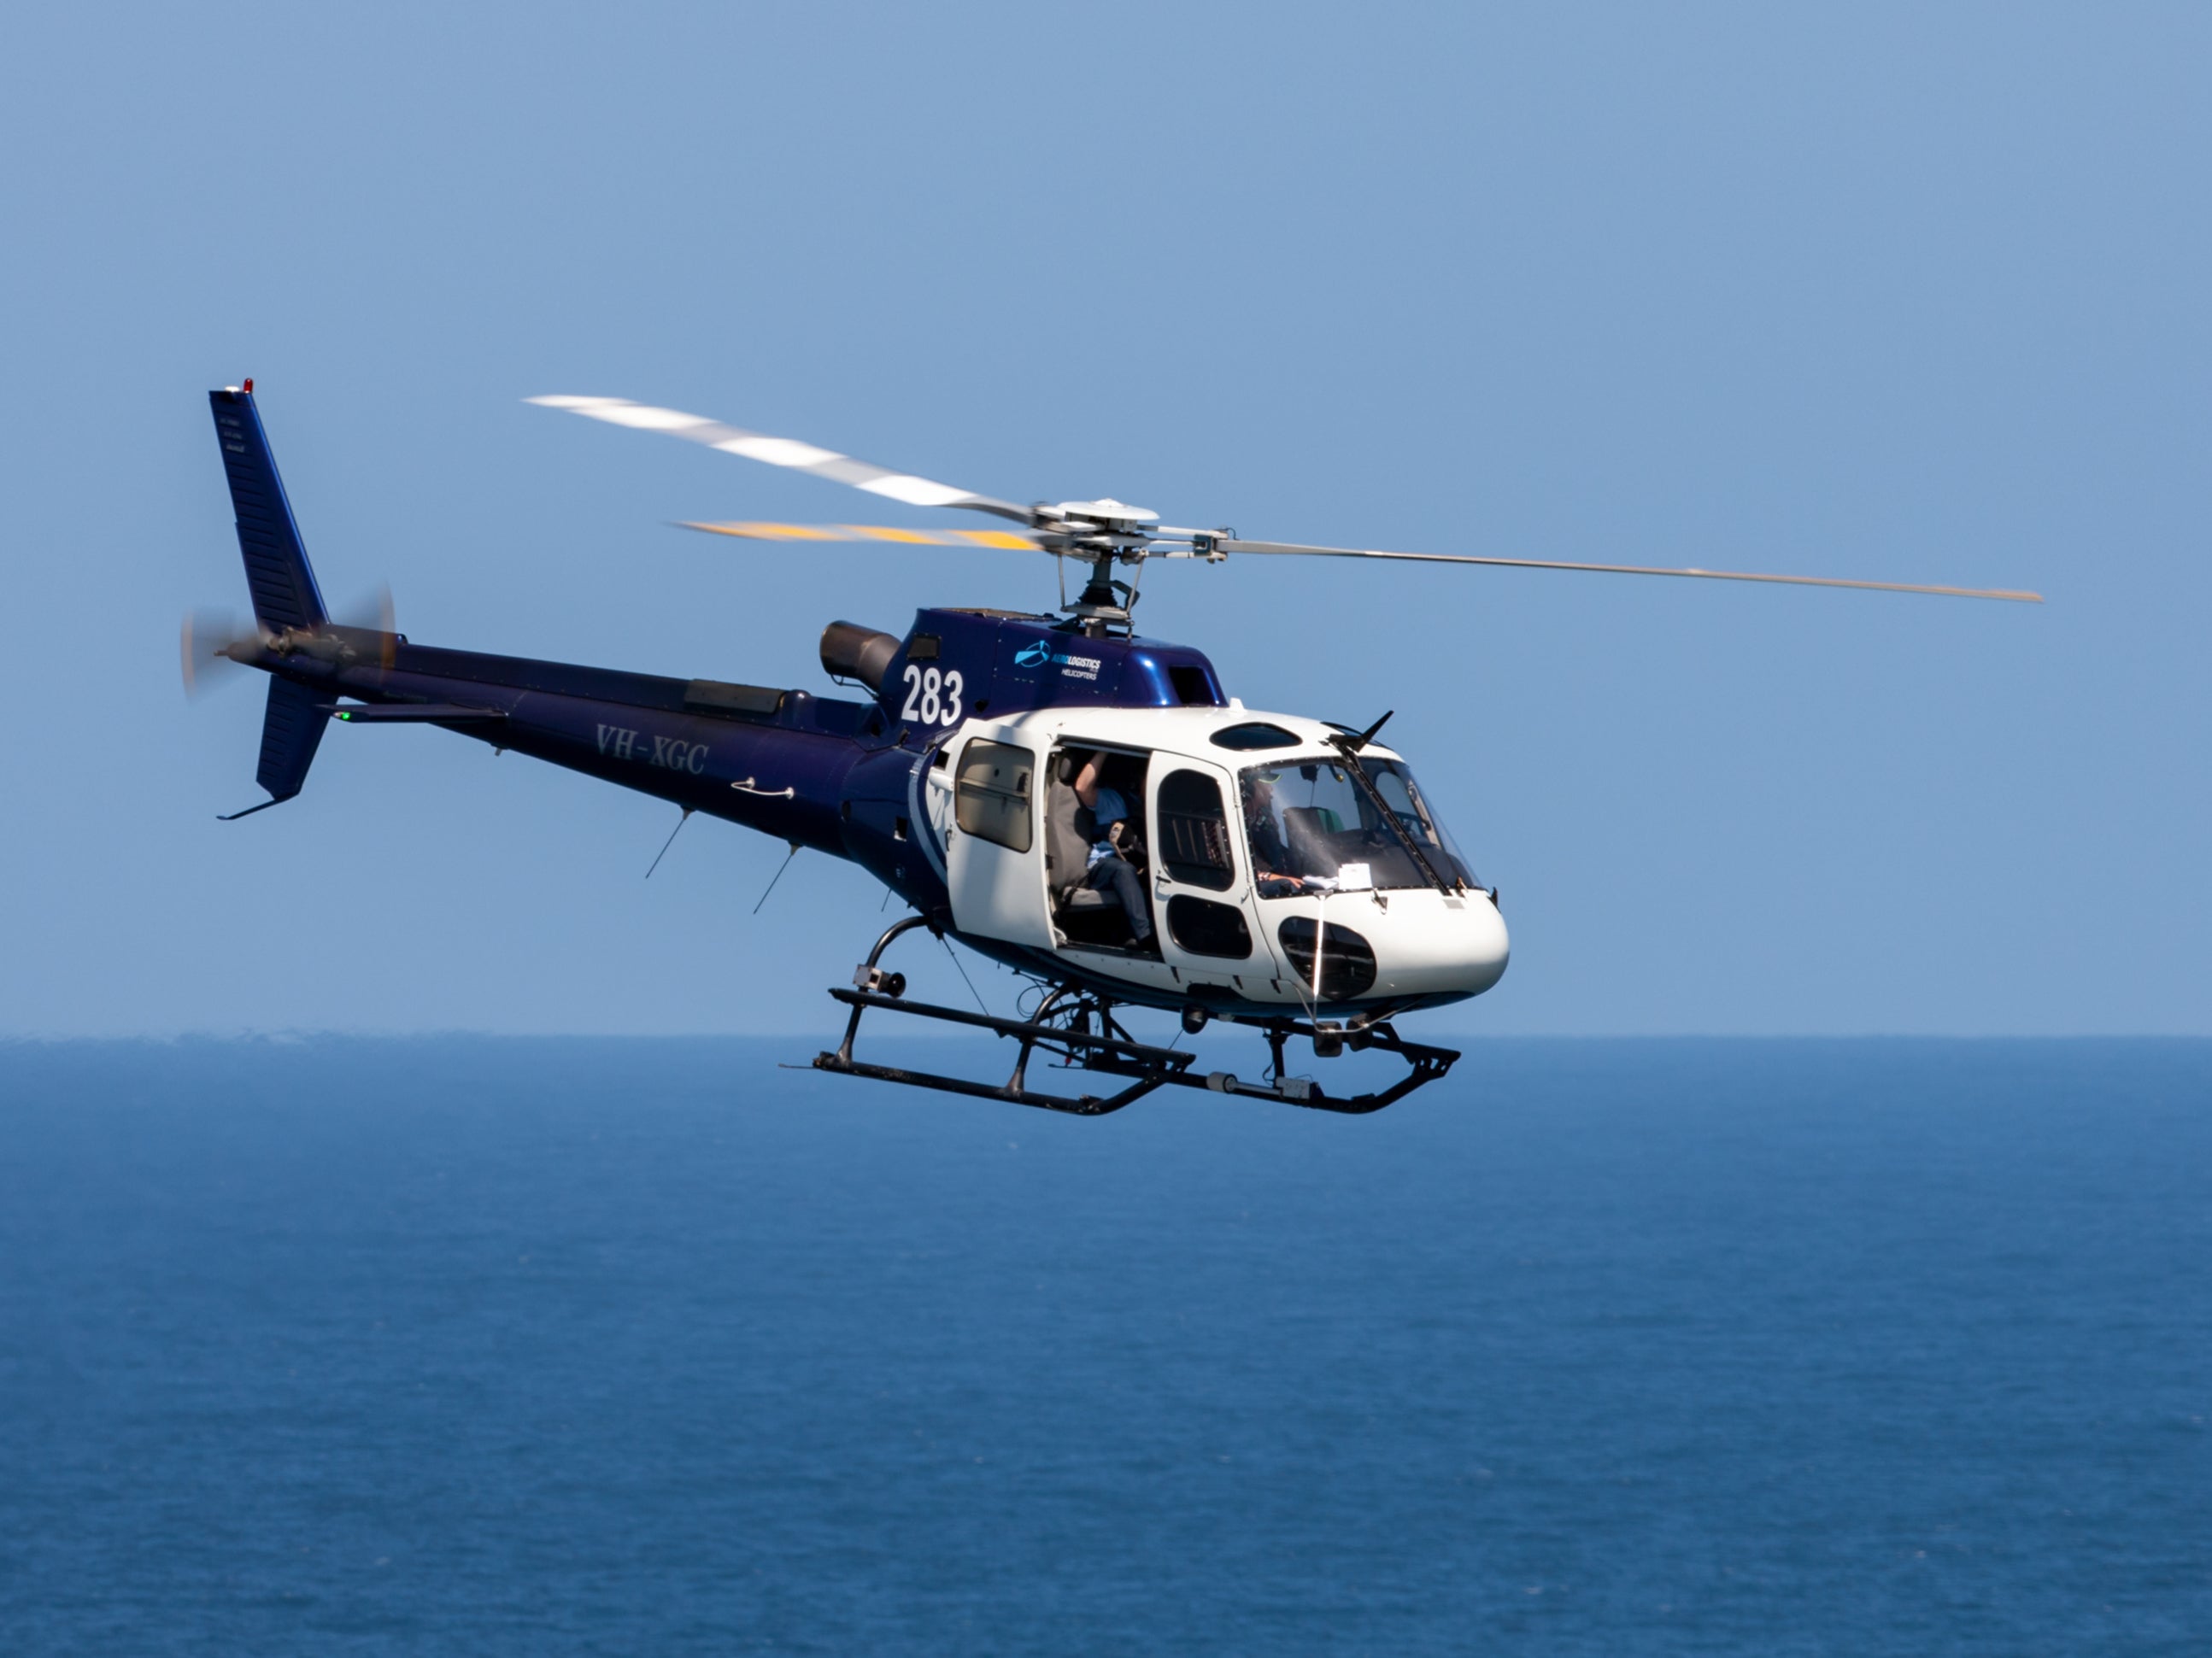 A file photo of an AS350 helicopter similar to the one that crashed in the Canadian Arctic on Sunday